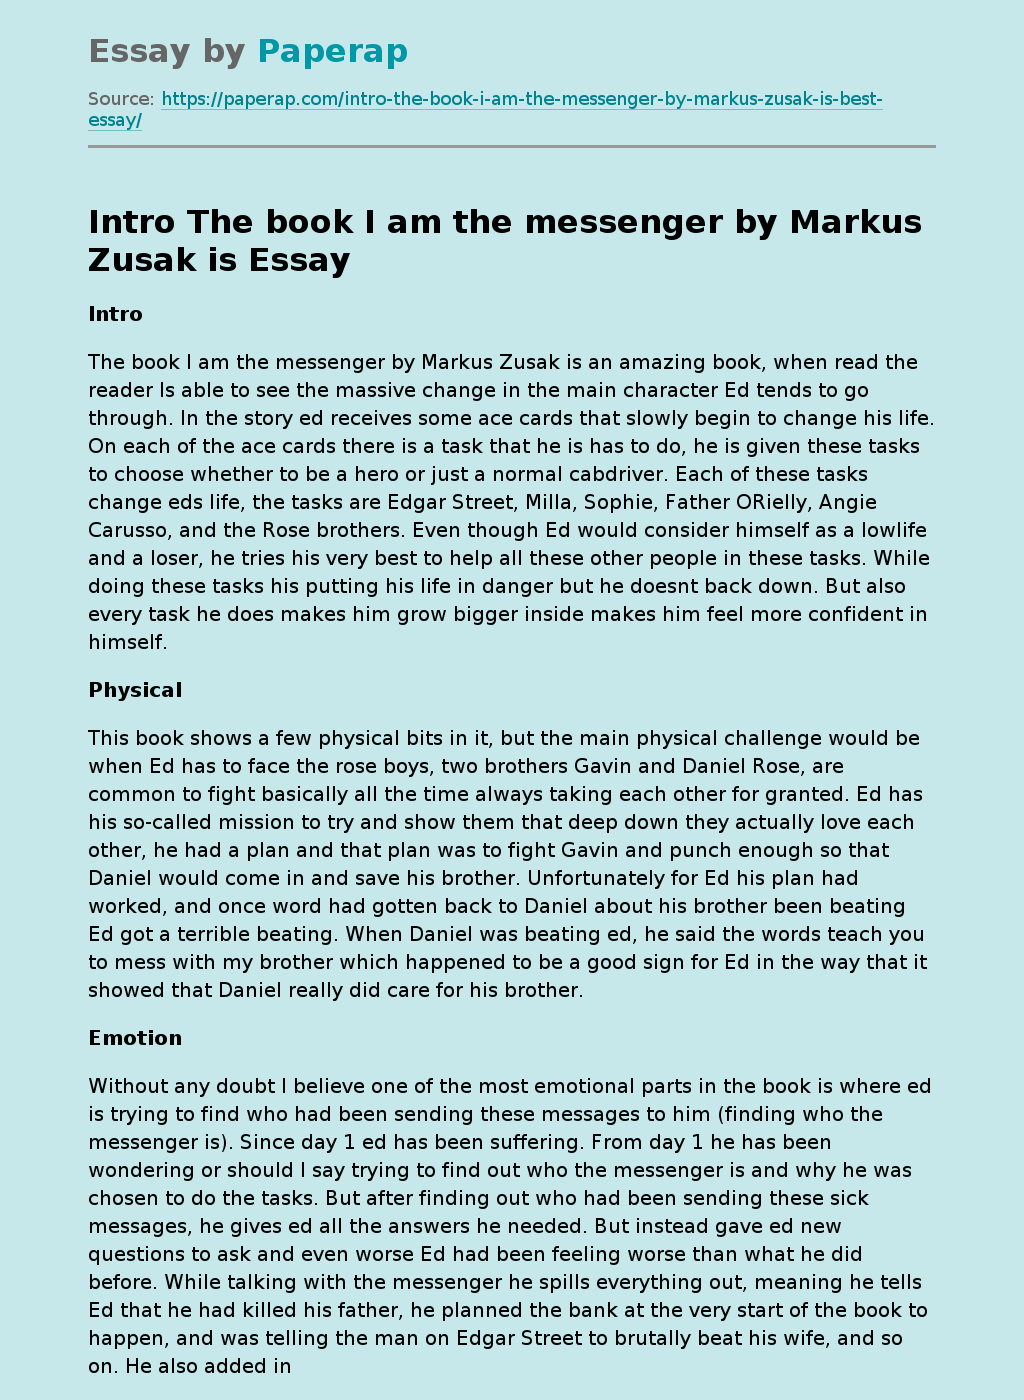 Intro The book I am the messenger by Markus Zusak is